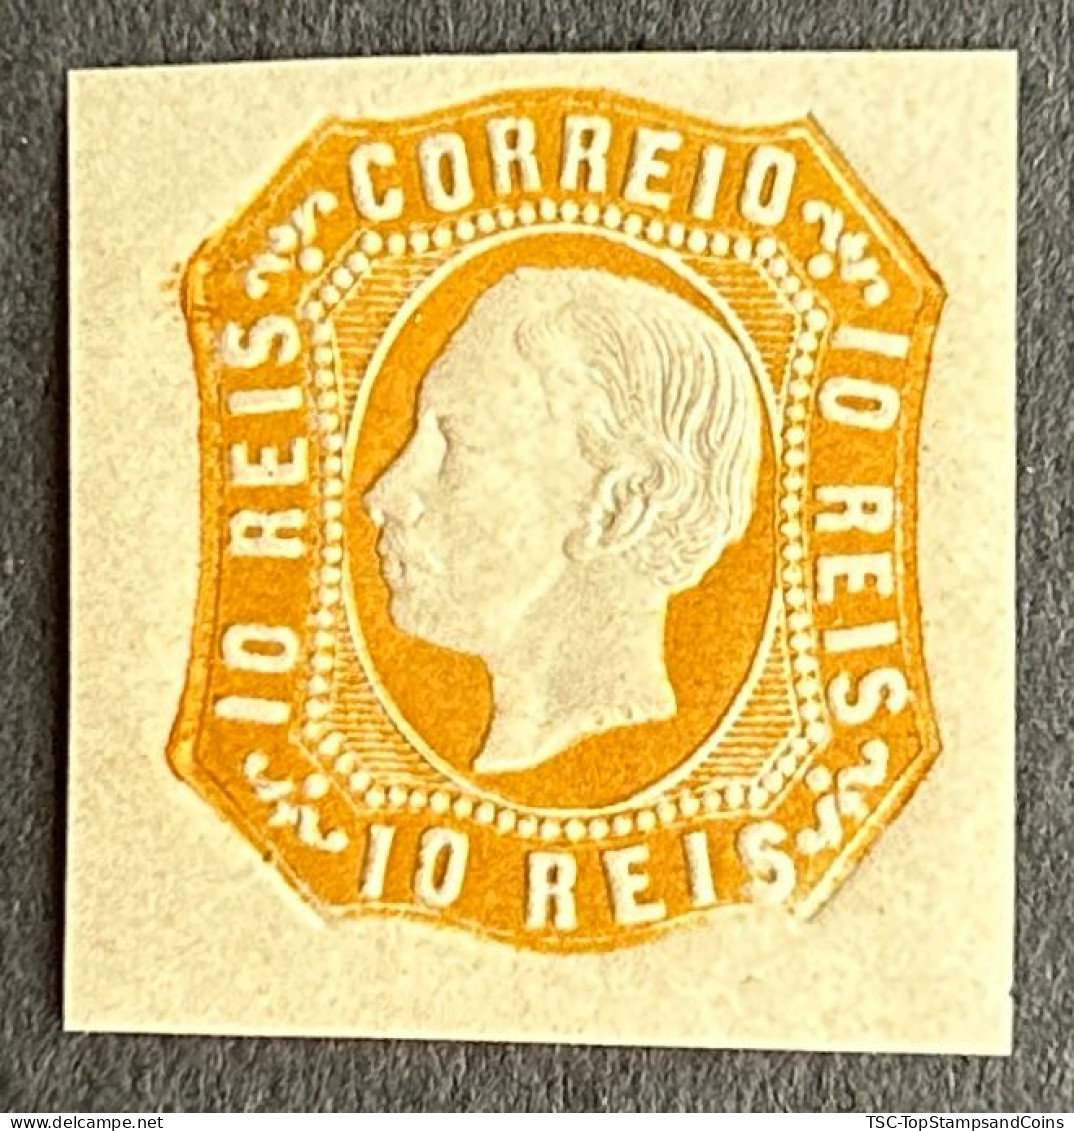 POR0015MNH - King D. Luís I - 10 Reis MNH Non Perforated Stamp - Portugal - 1863 - Ungebraucht